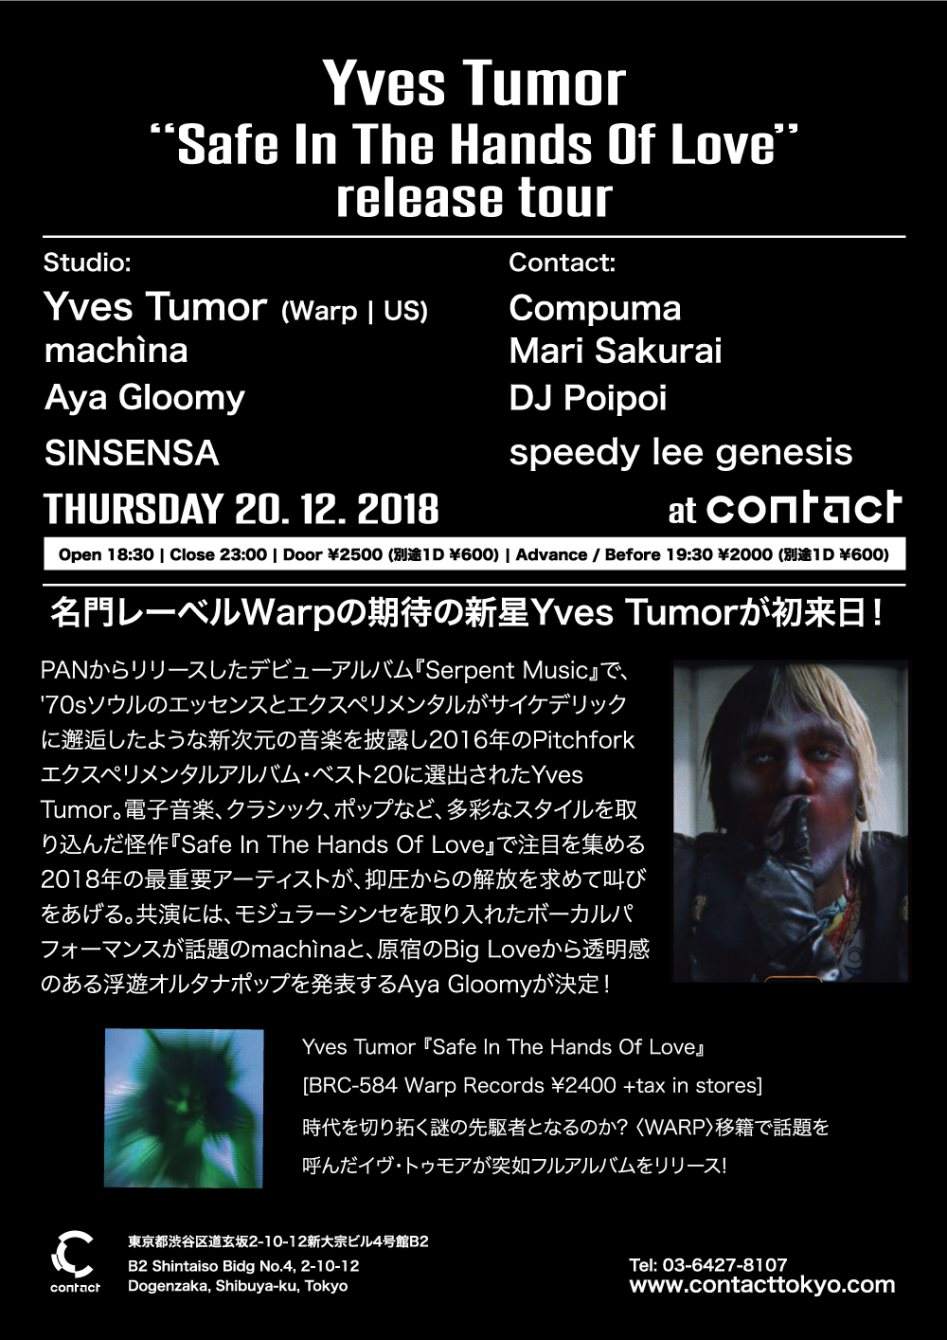 Yves Tumor “Safe In The Hands Of Love” Release Tour - フライヤー裏